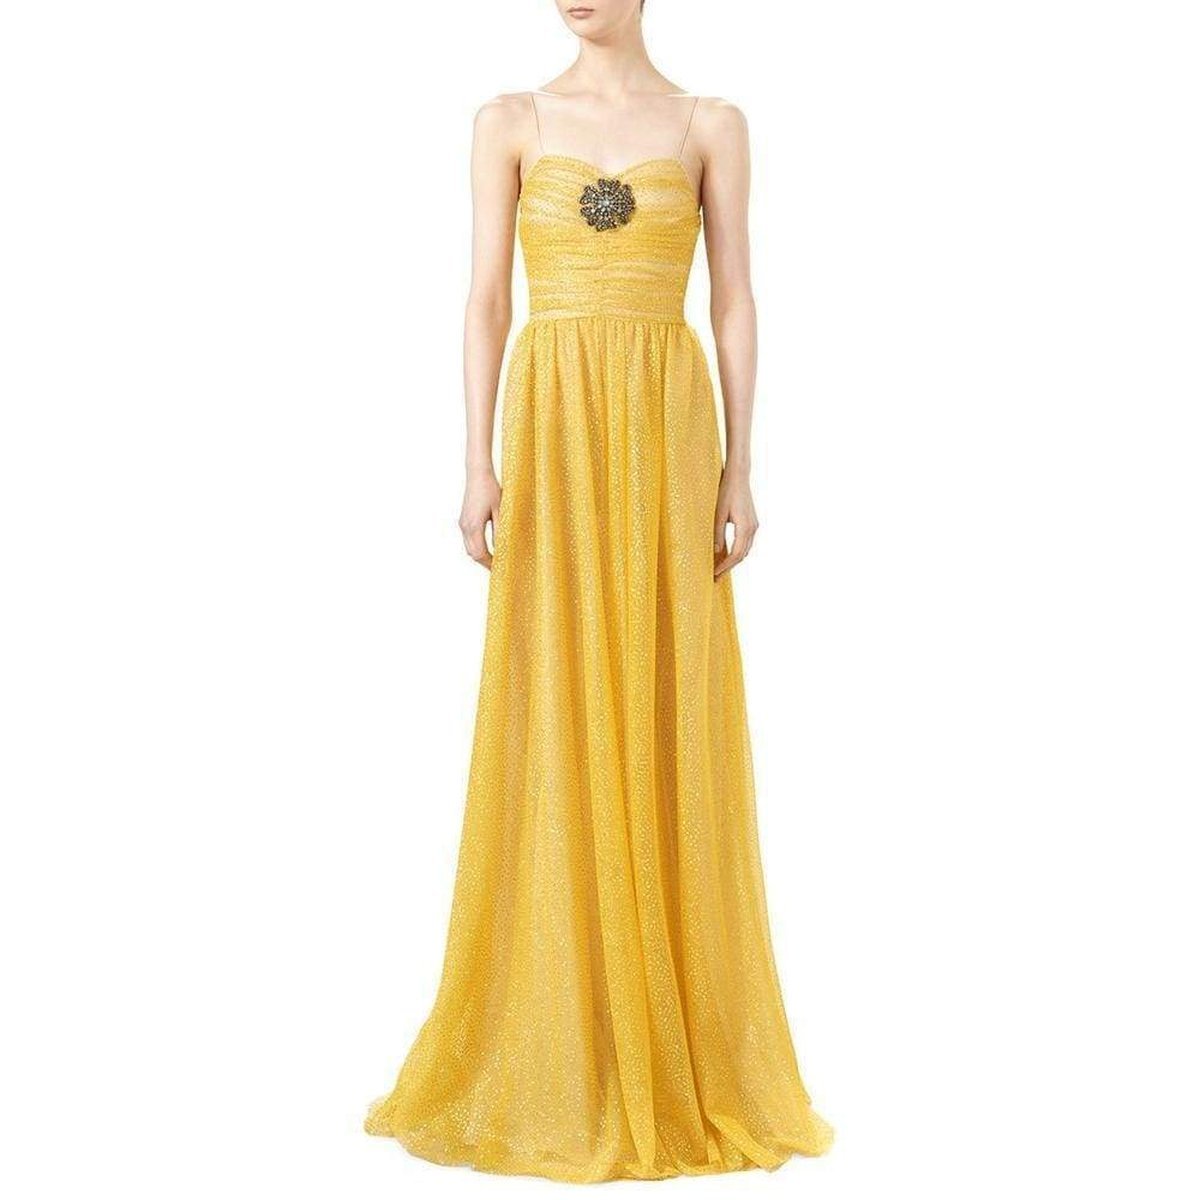 Gucci-Yellow Glitter Tulle Gown - Runway Catalog